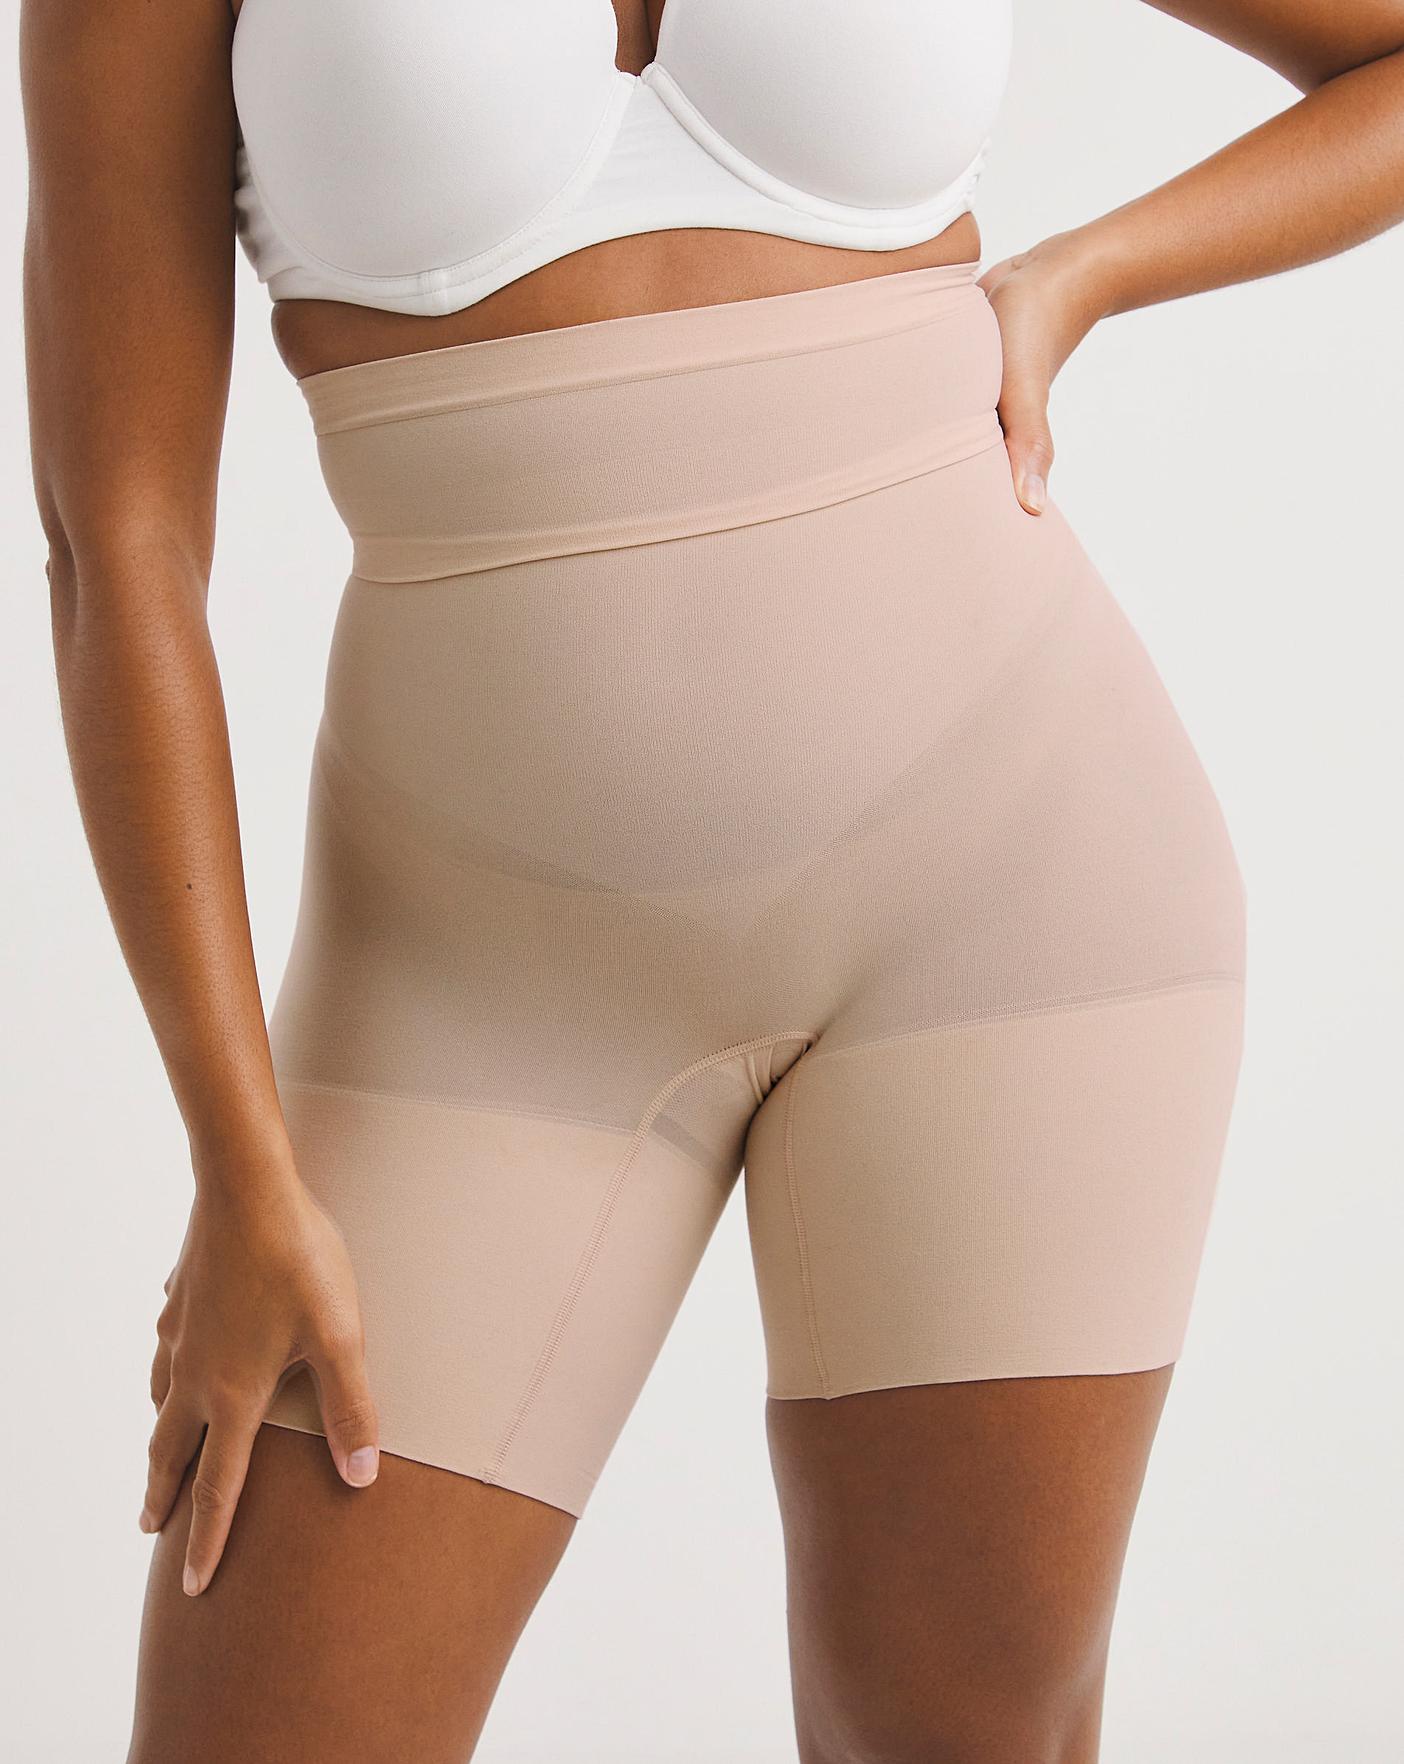 Spanx Firm Control Everyday Seamless Shaping High-Waisted Knickers, £35.00